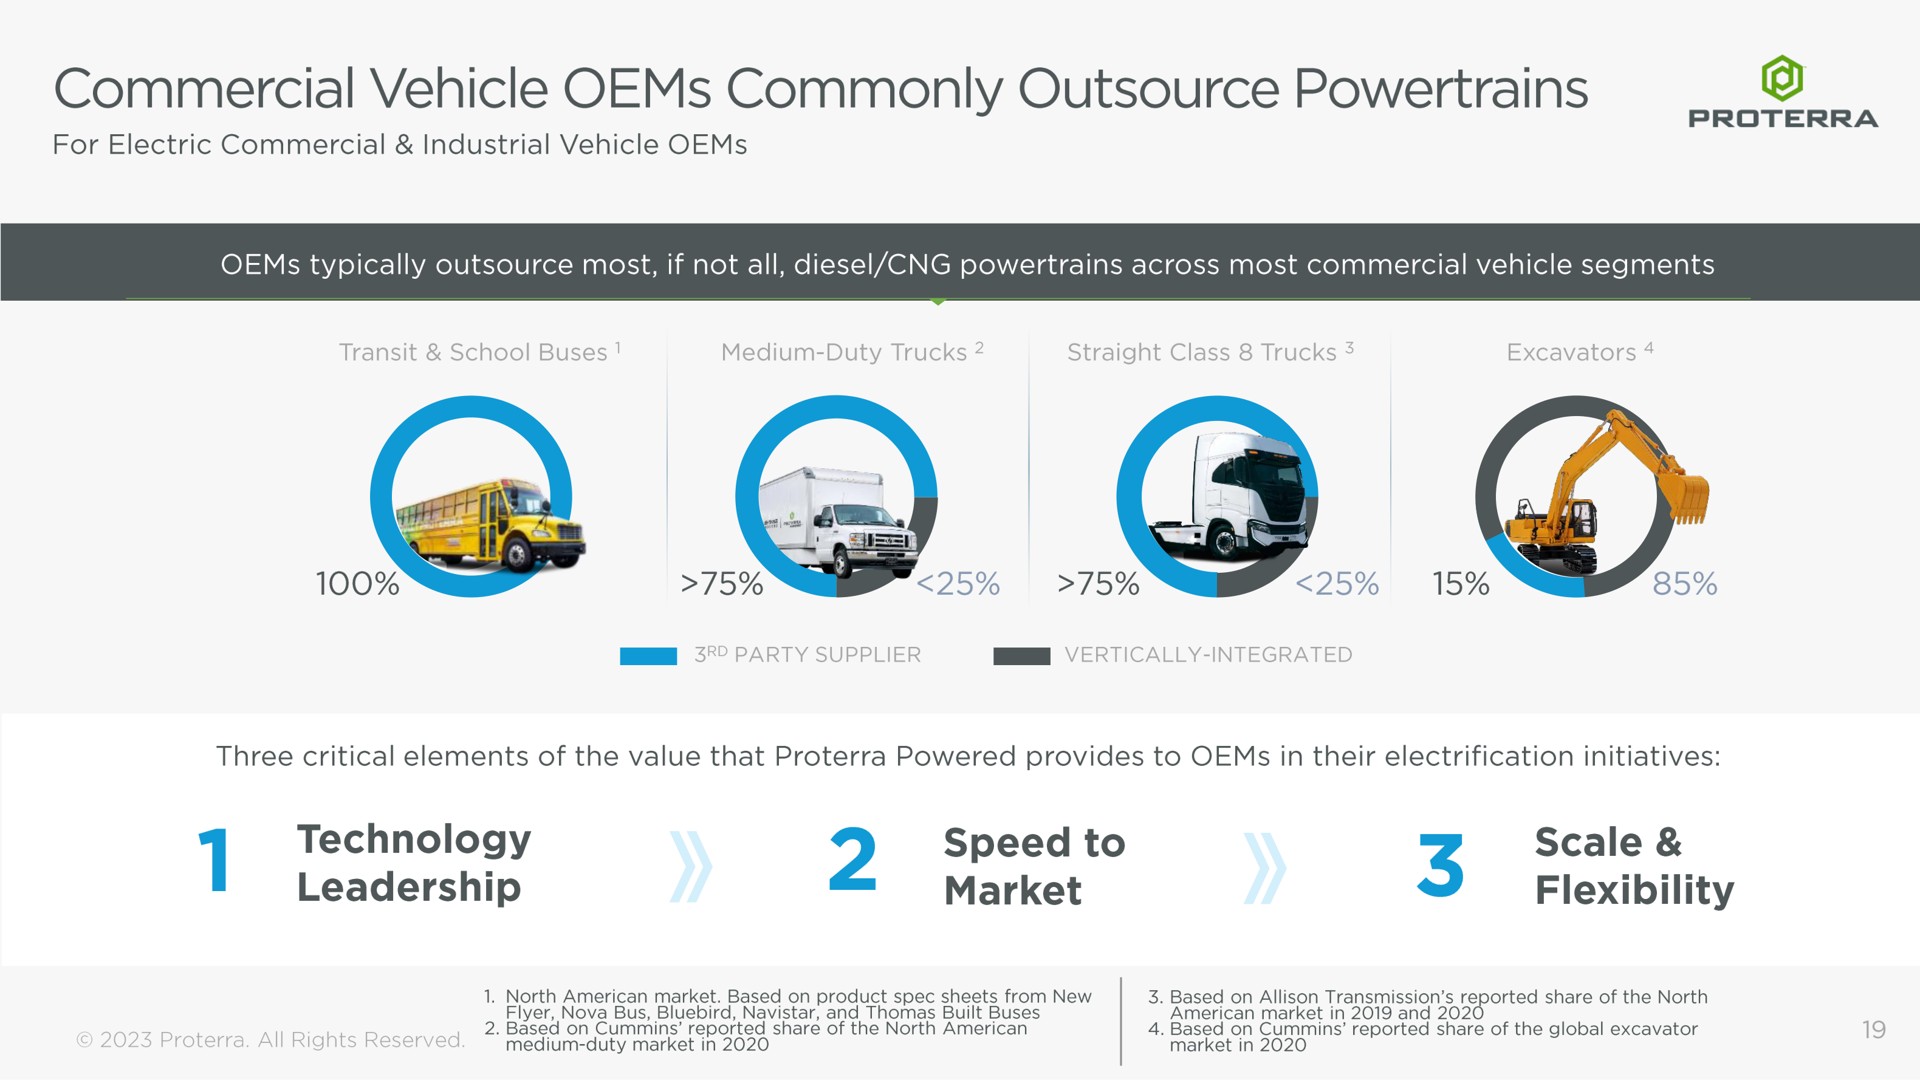 commercial vehicle commonly technology leadership speed to market scale flexibility | Proterra